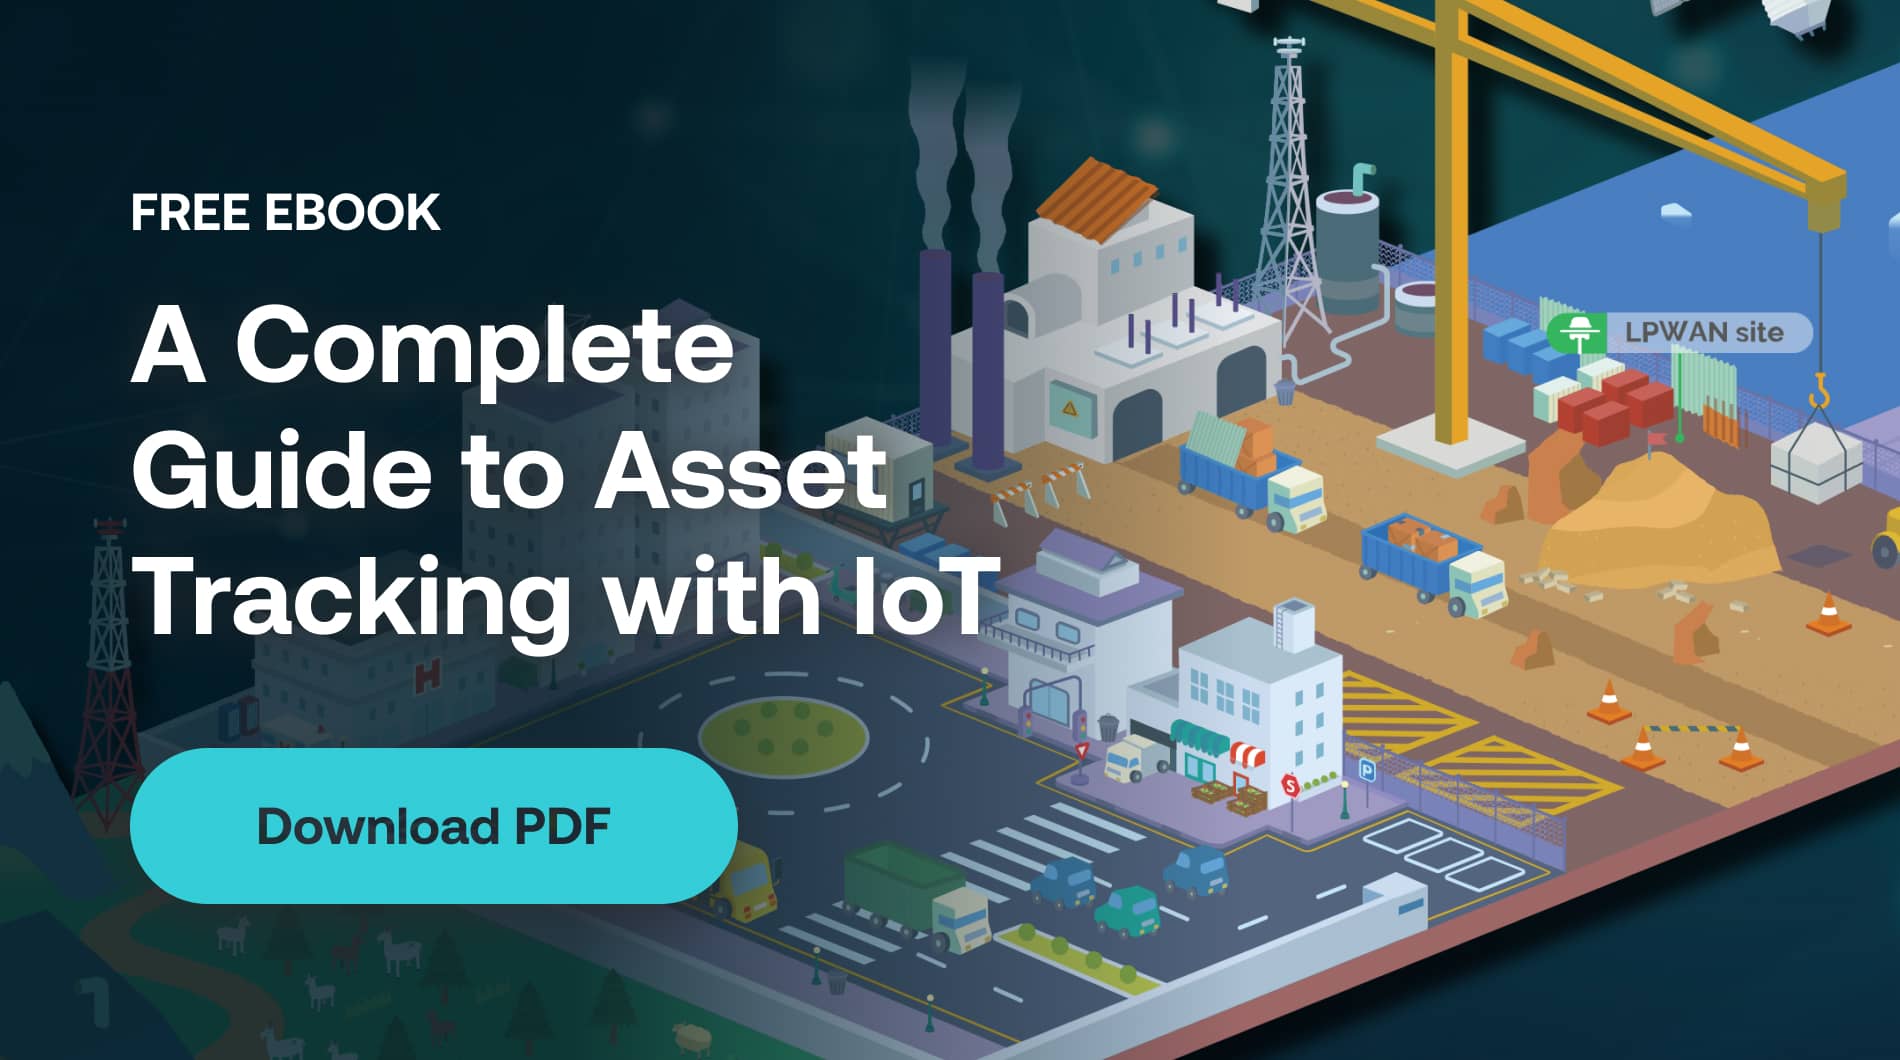 A Complete Guide to Asset Tracking with IoT – More info